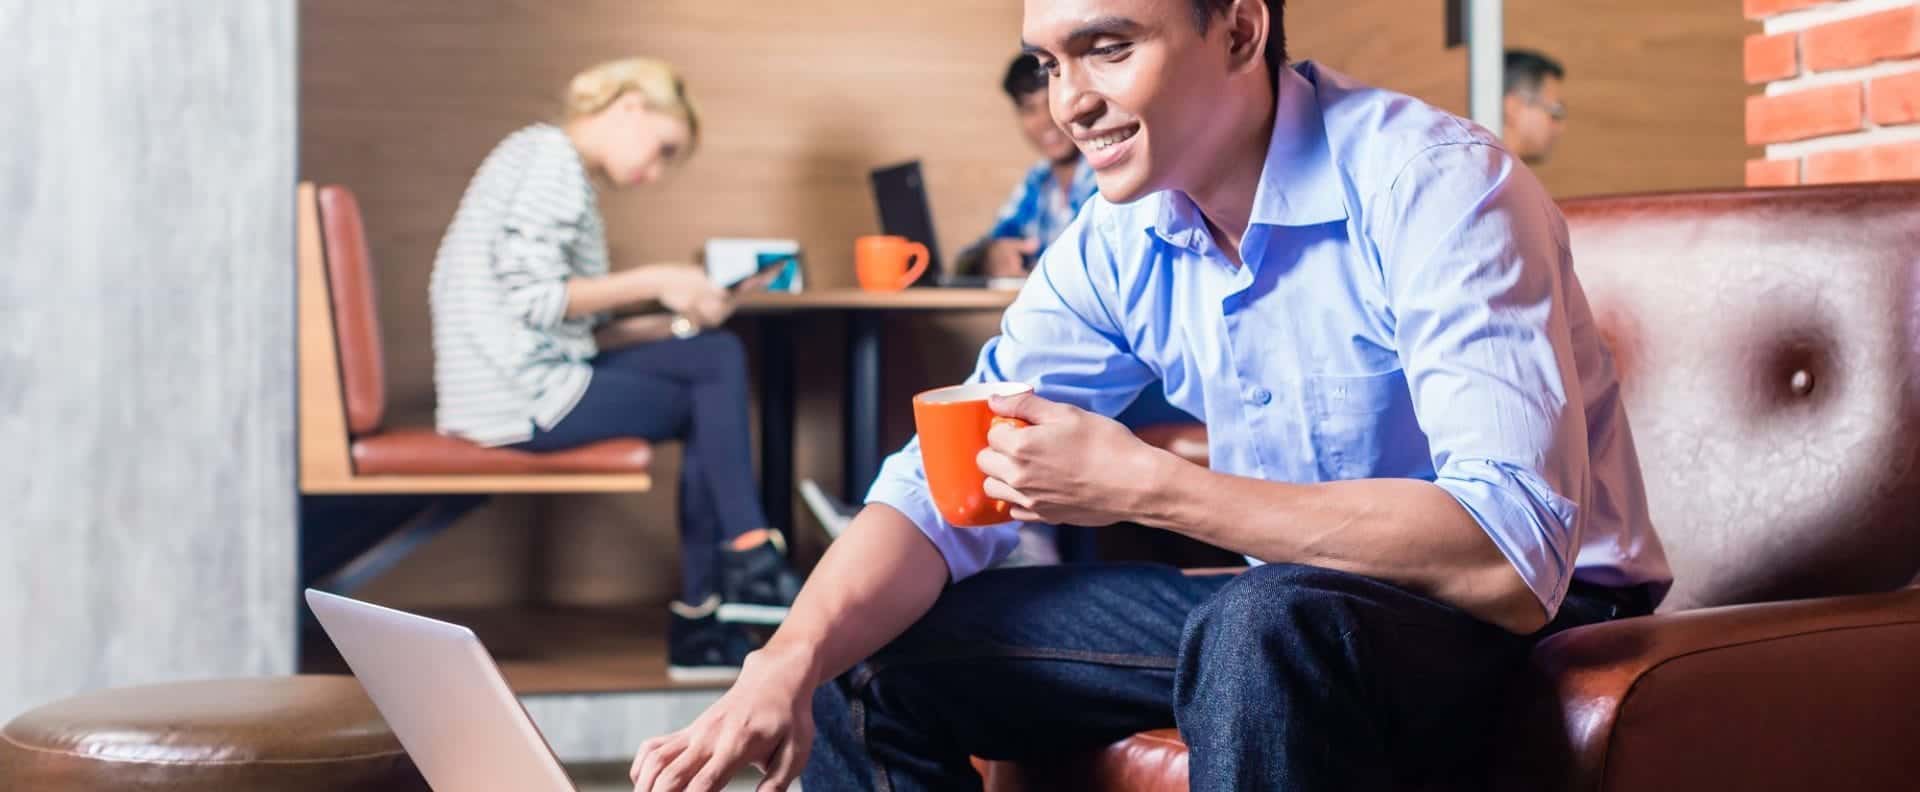 Man working on a leather couch on his laptop drinking coffee